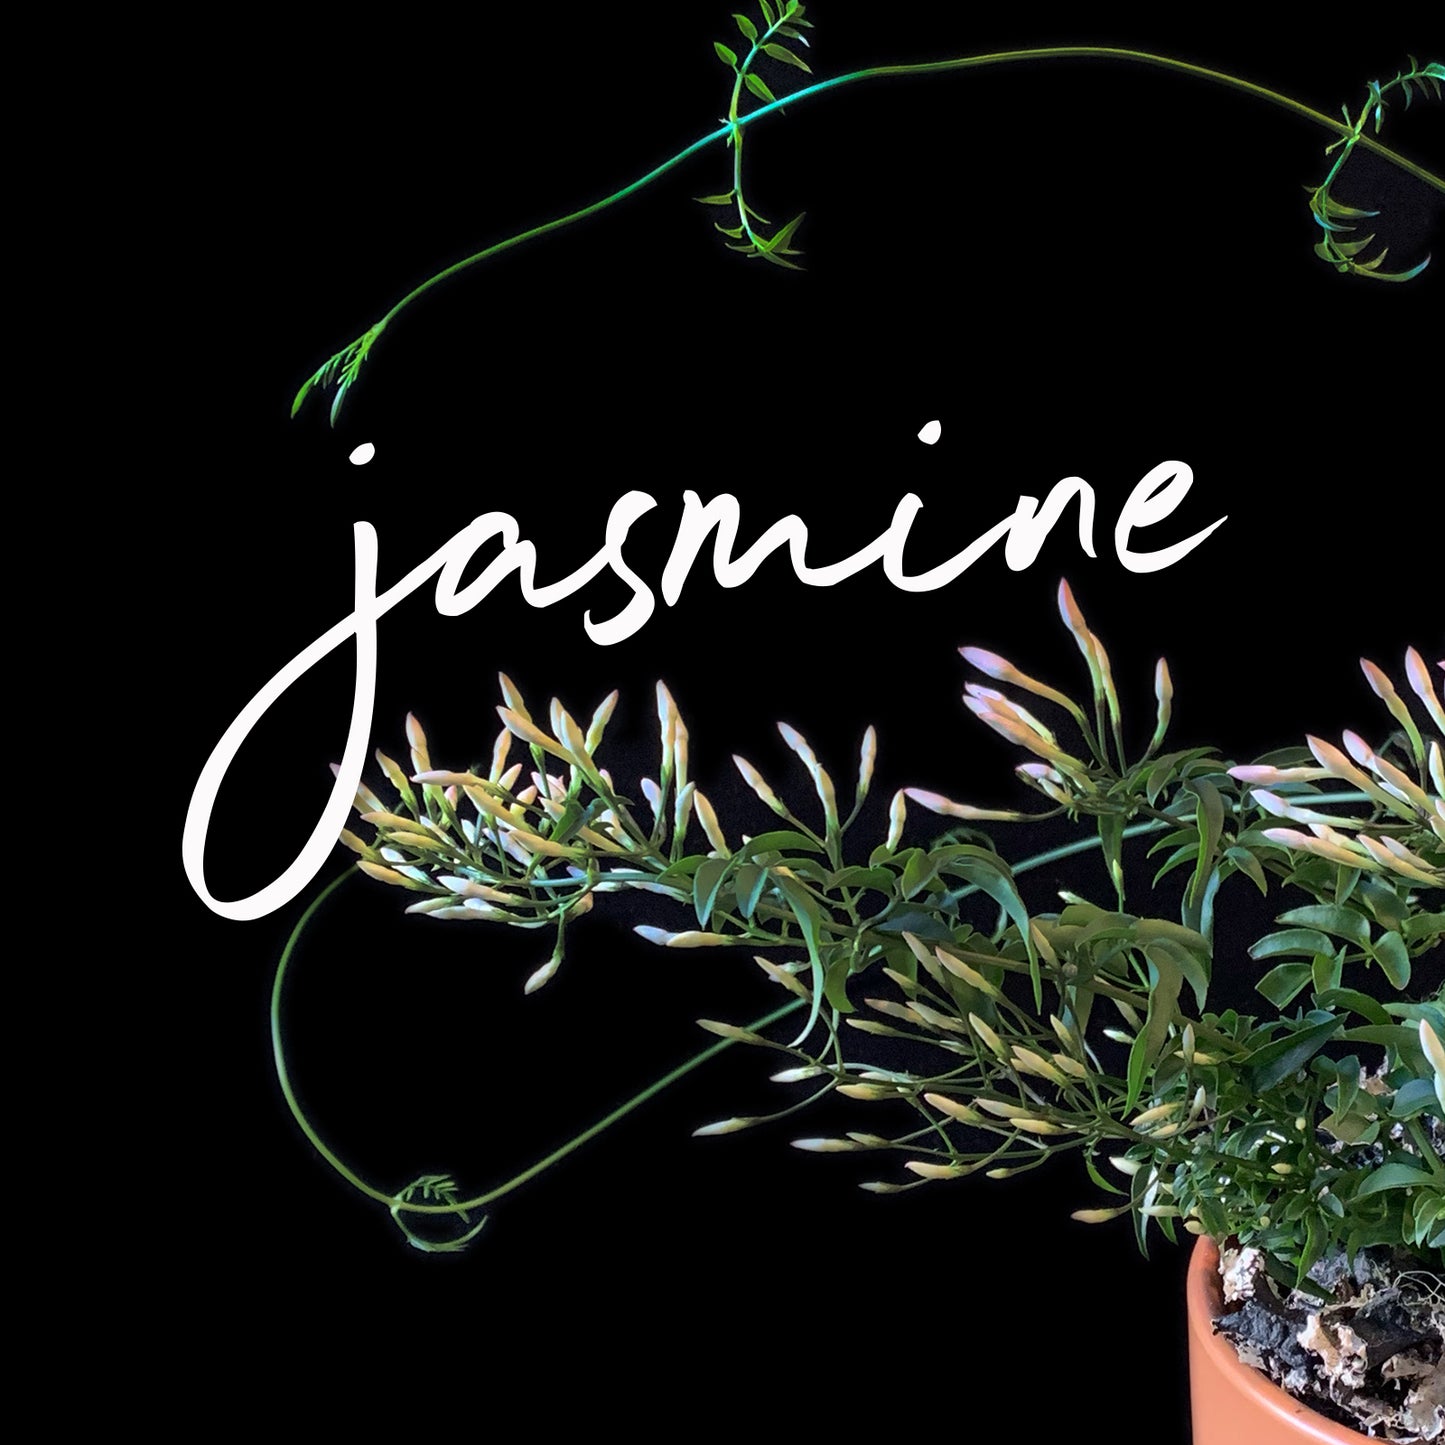 A potted jasmine plant with green leaves and white flowers against a dark background, with the word ‘jasmine’ written in elegant white script. Order online for plants & flowers from the best florist in Toronto near you.